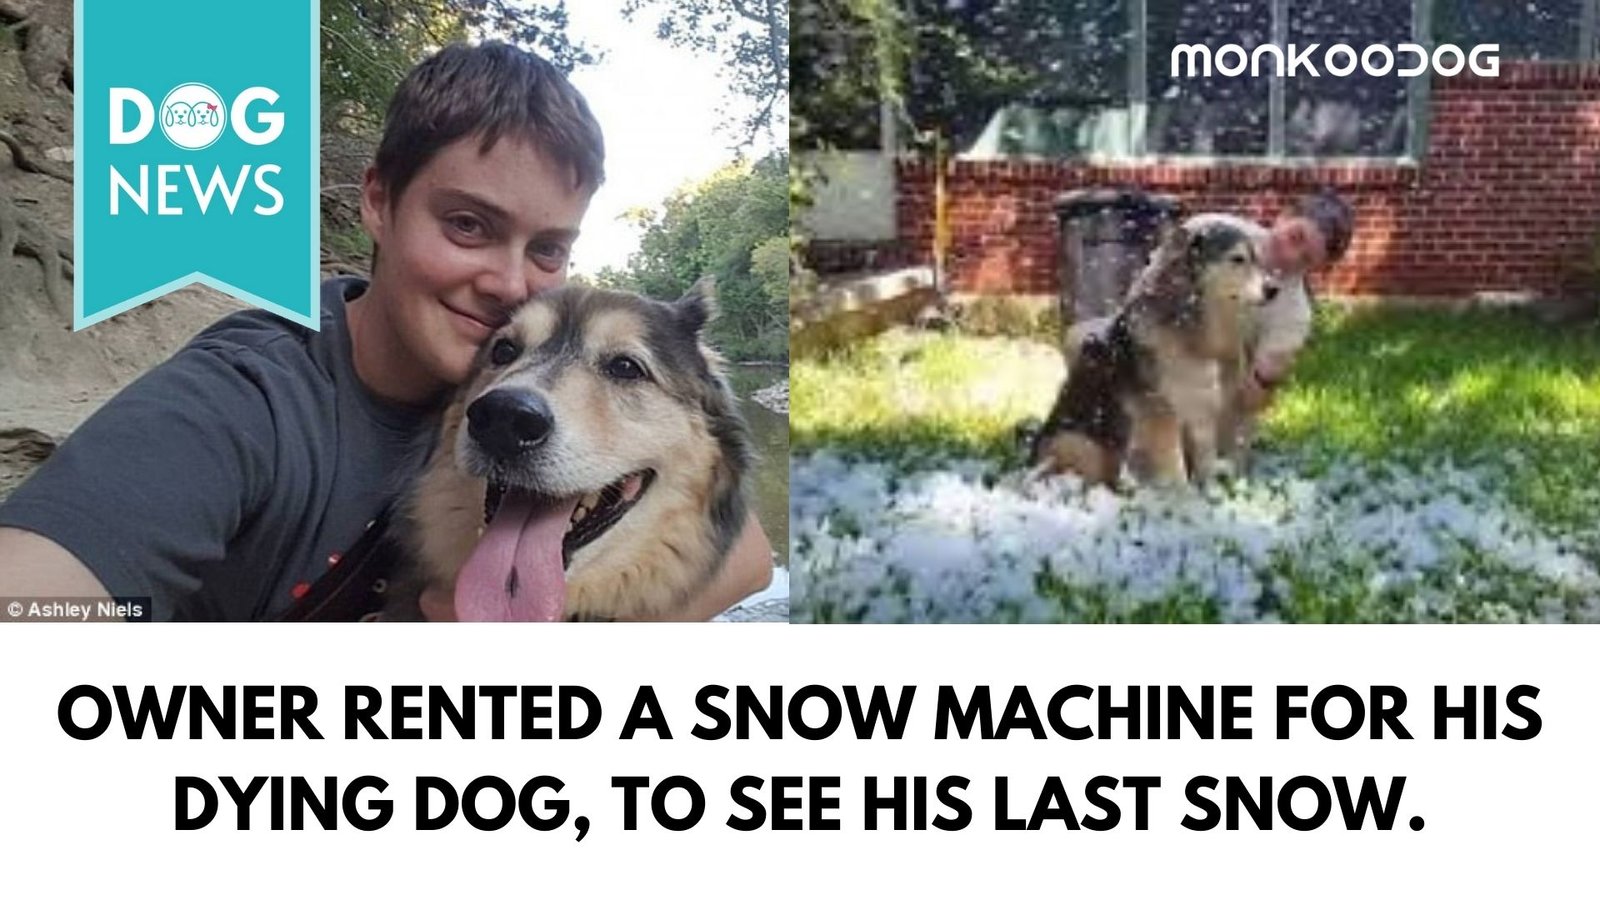 A Dog Owner rented a snow machine to show his dying dog the snow for the Last Time.